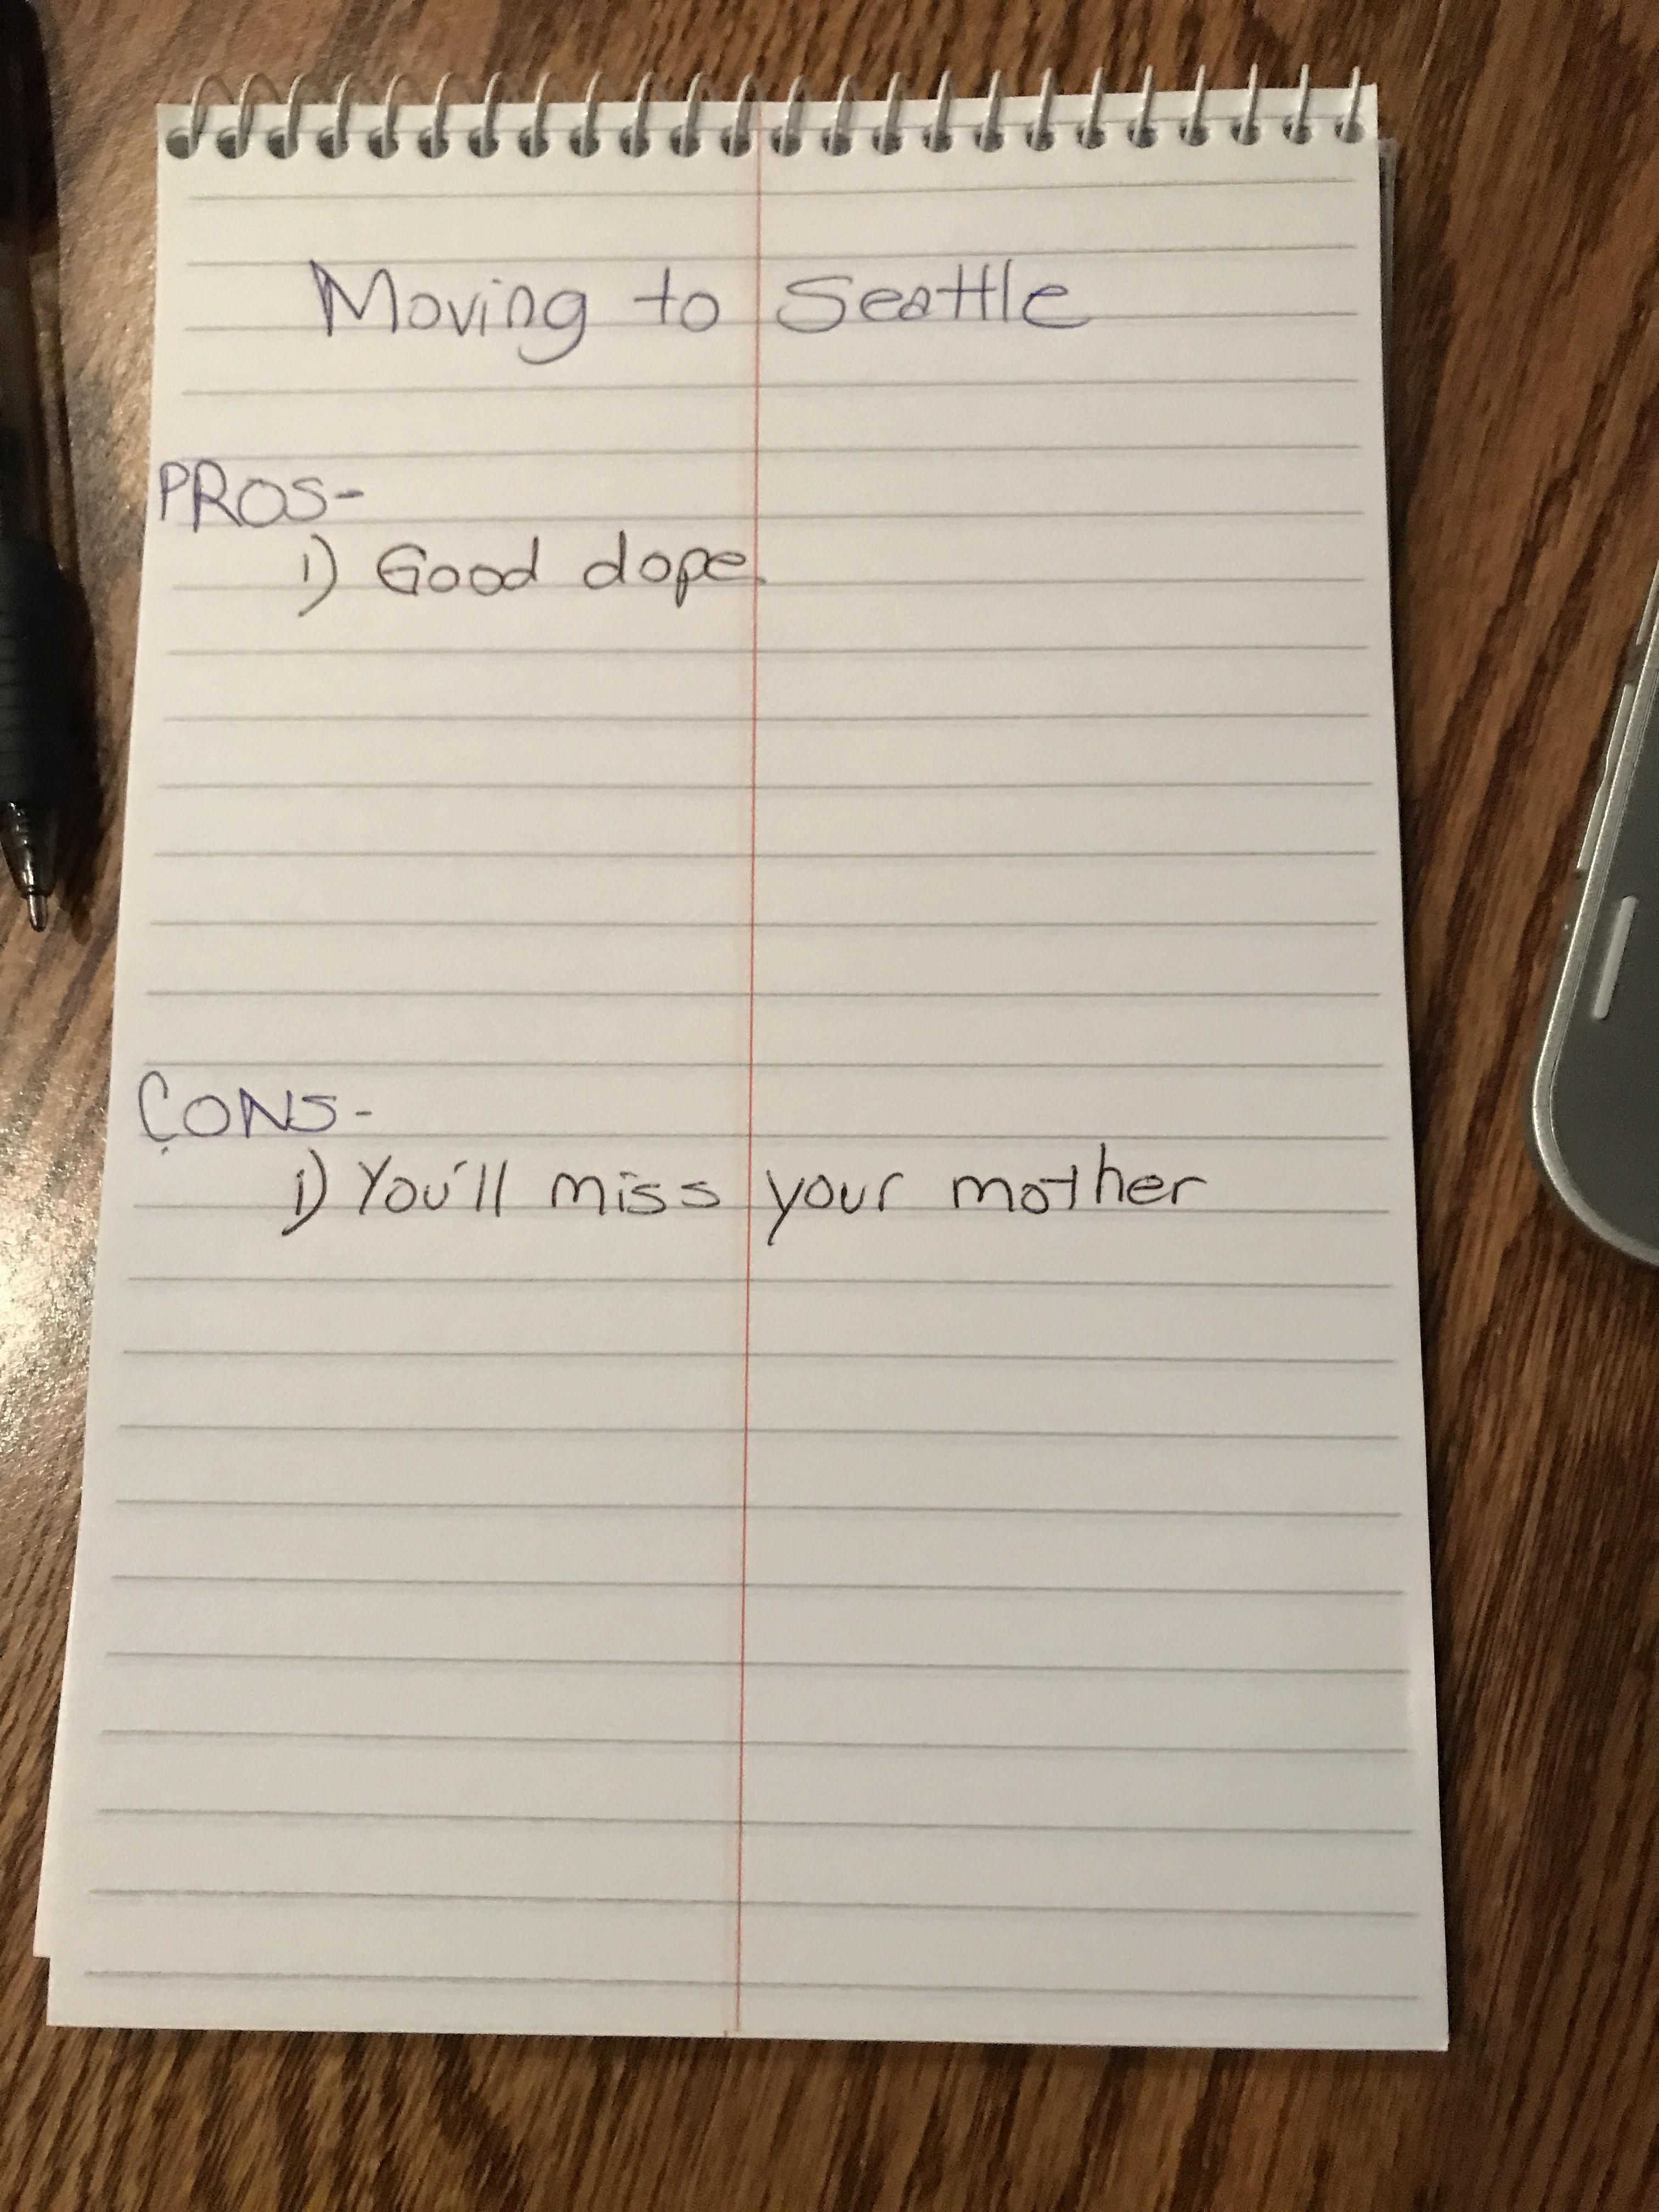 My mom started a pros and cons list for me about moving to Seattle.